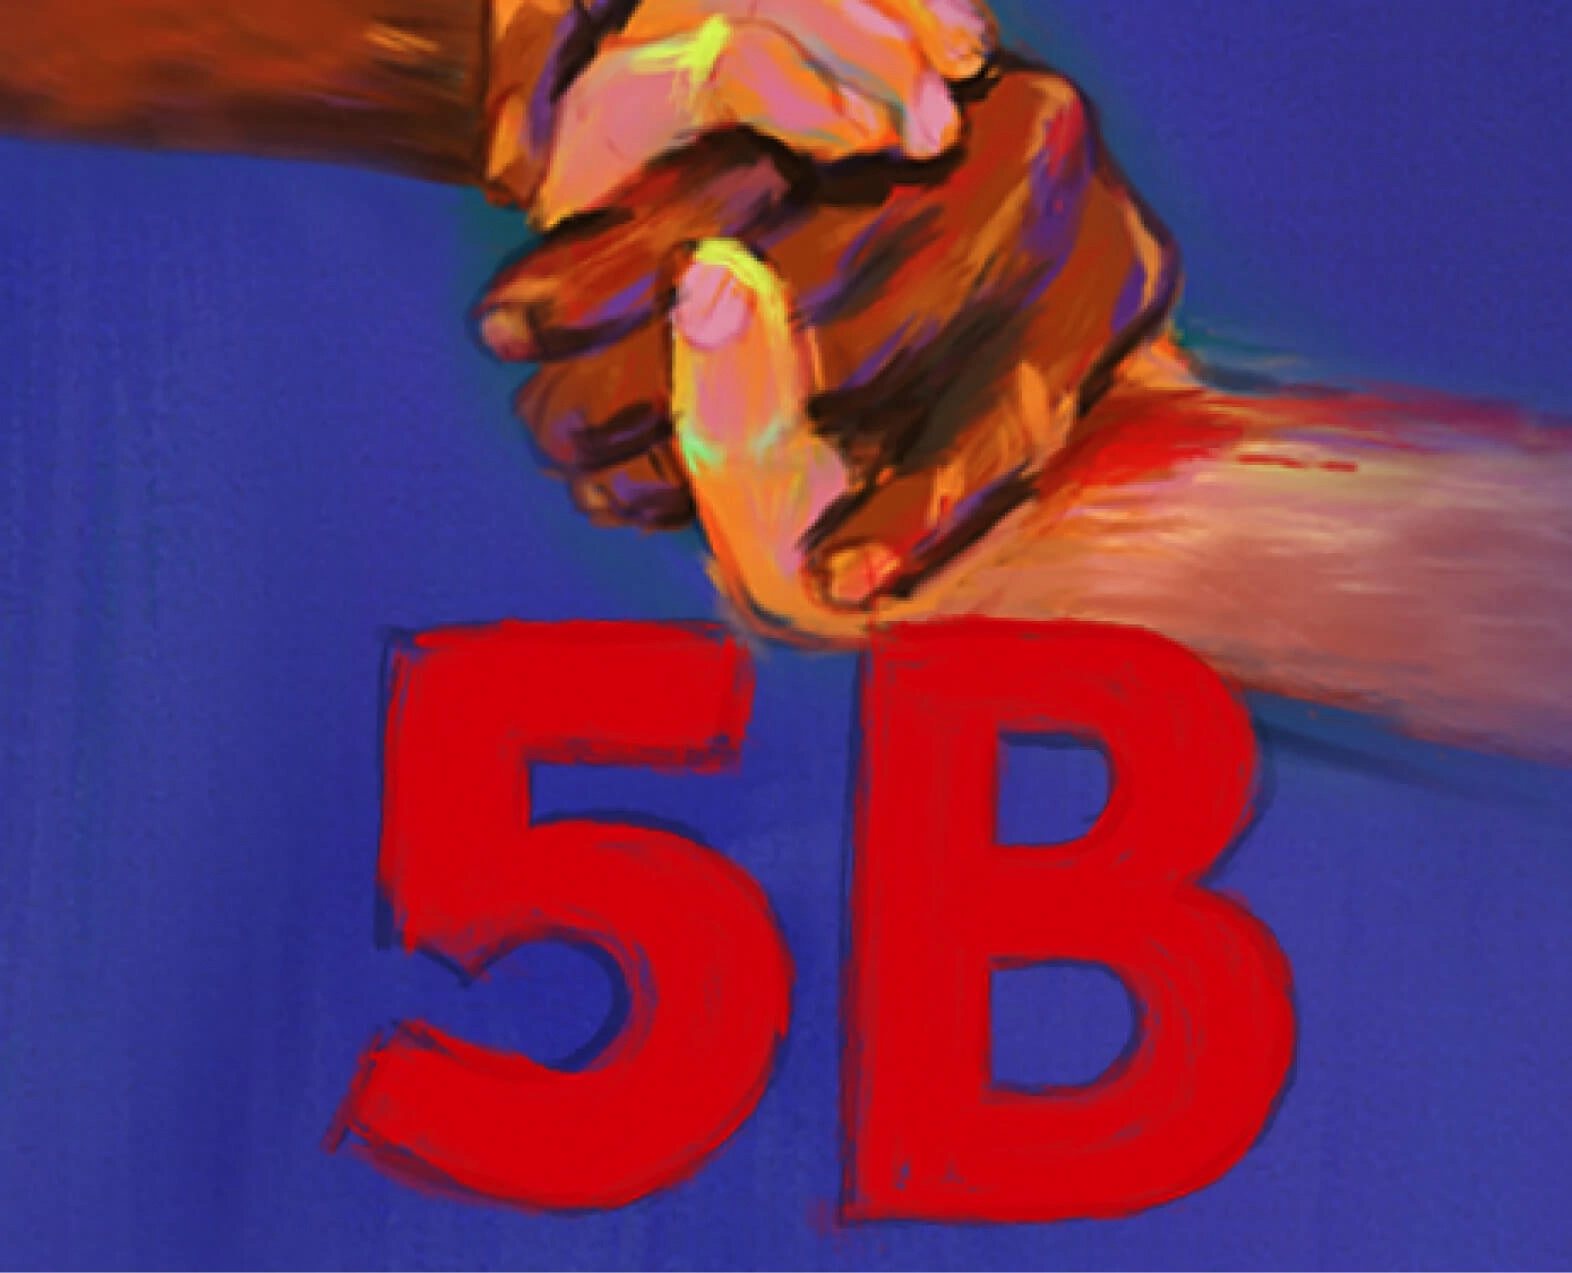 Illustration of two hands clasped together with the text "5B." (photo)